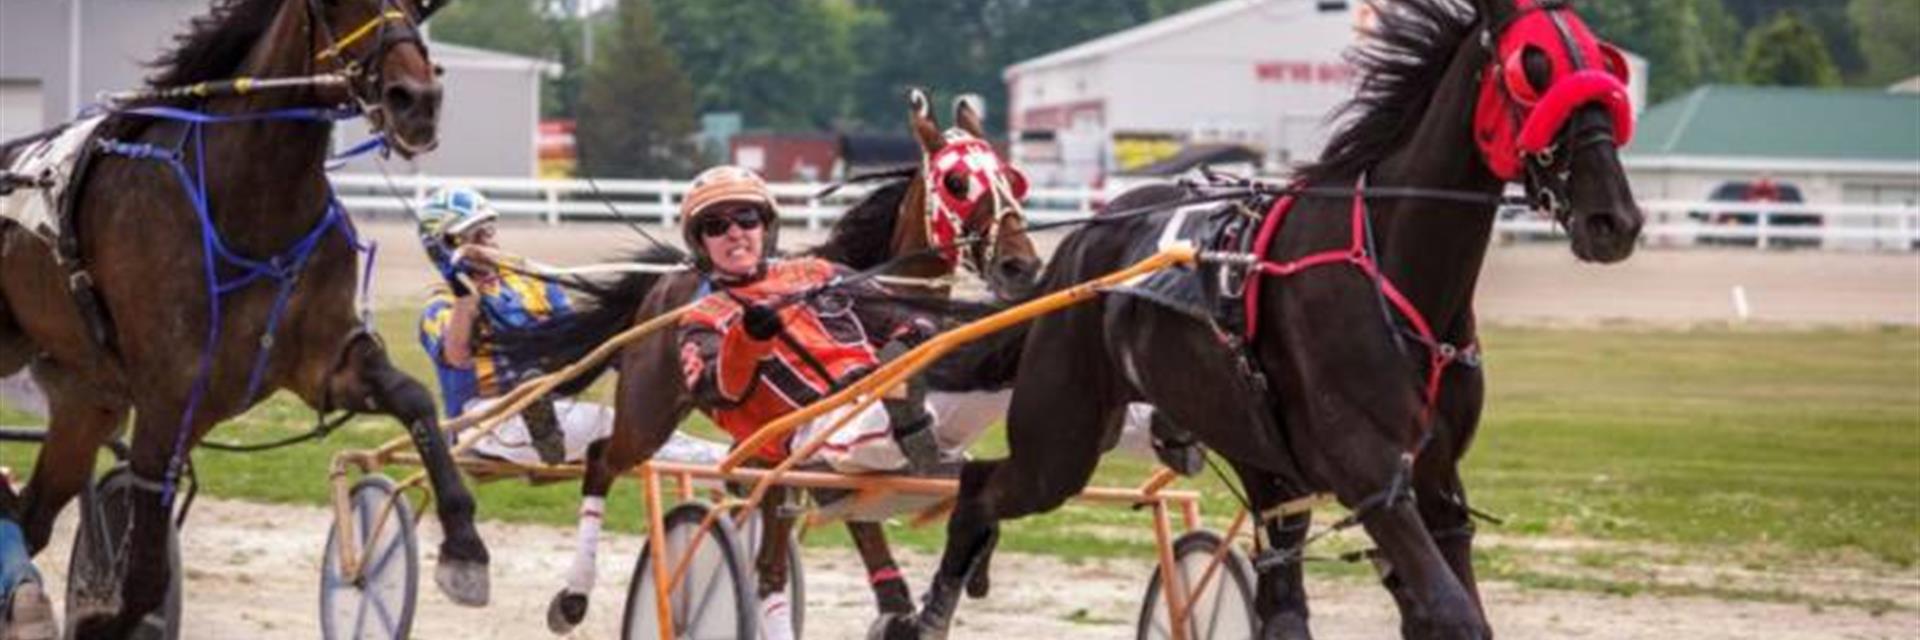 horse racing happening on the track at the dresden raceway